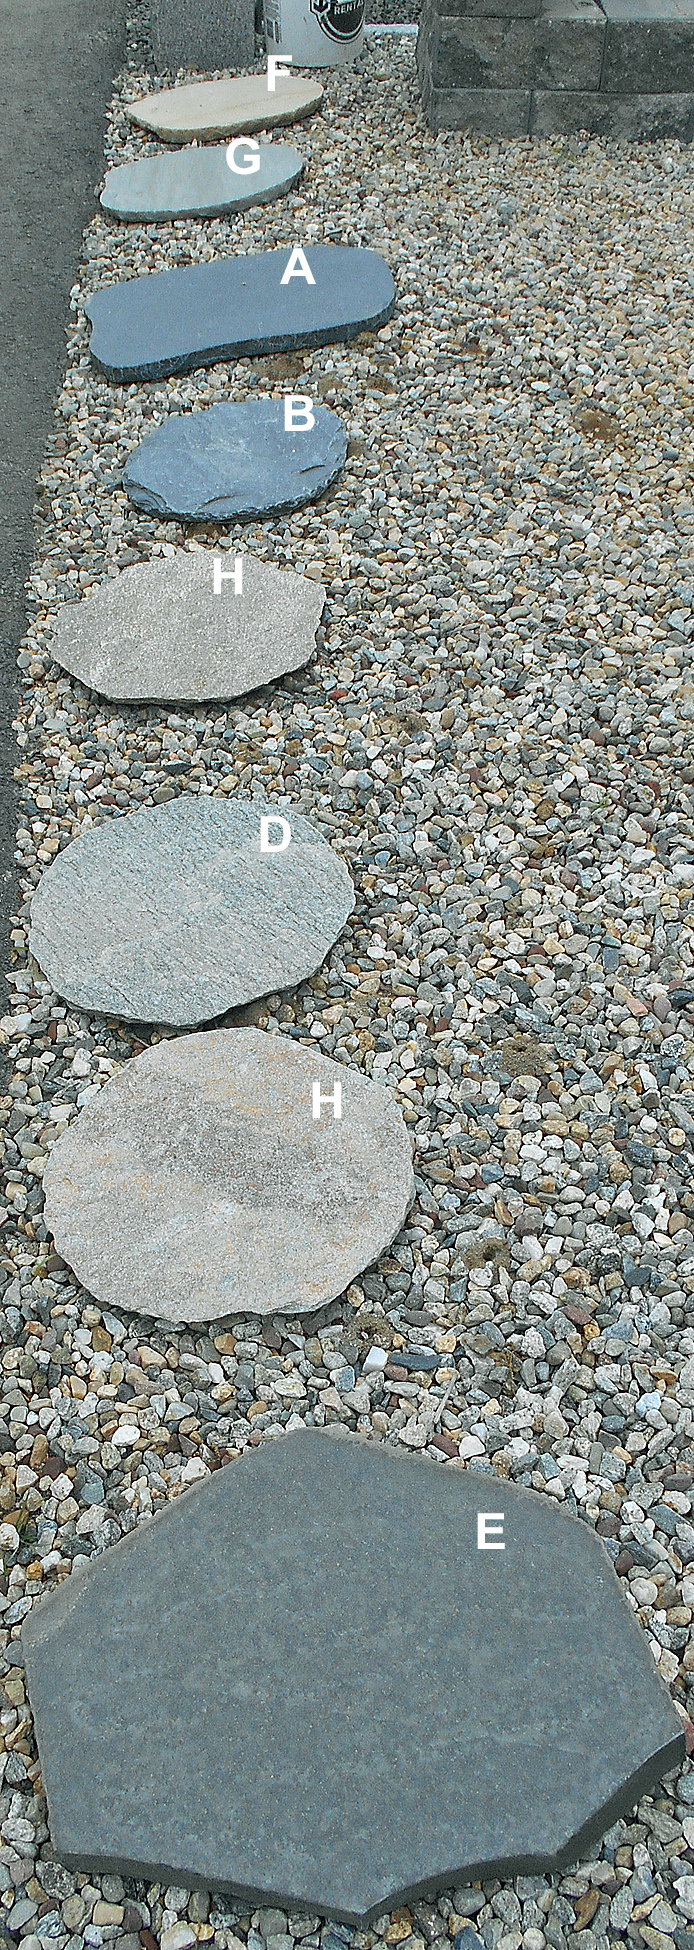 steping-stone-all-letters